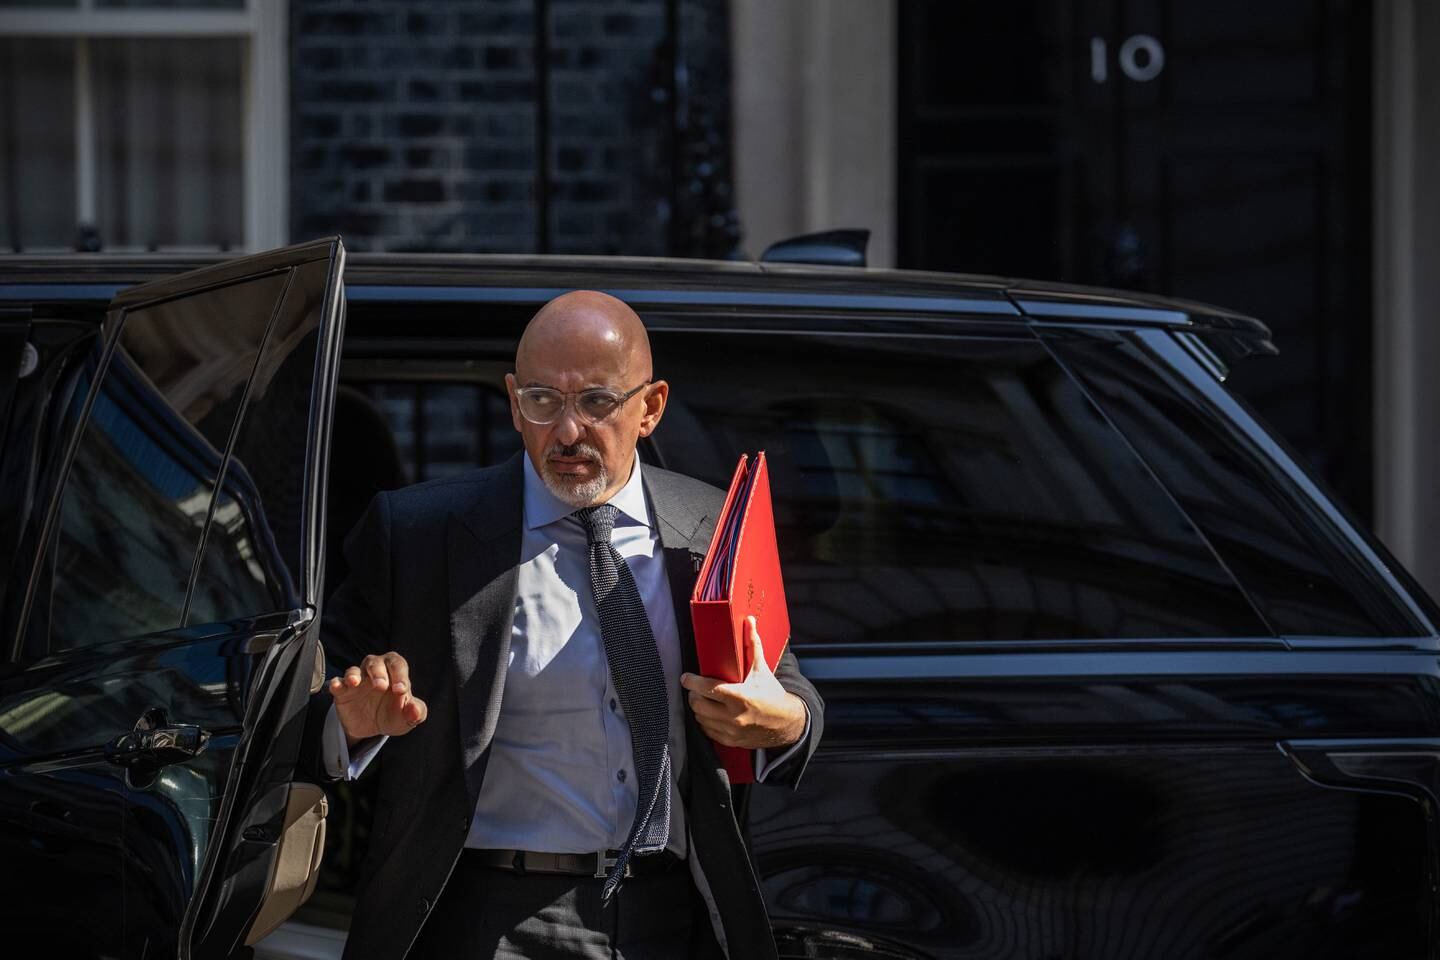 Secretary of State for Education Nadhim Zahawi arrives to attend a weekly Cabinet meeting in Downing Street. Getty Images